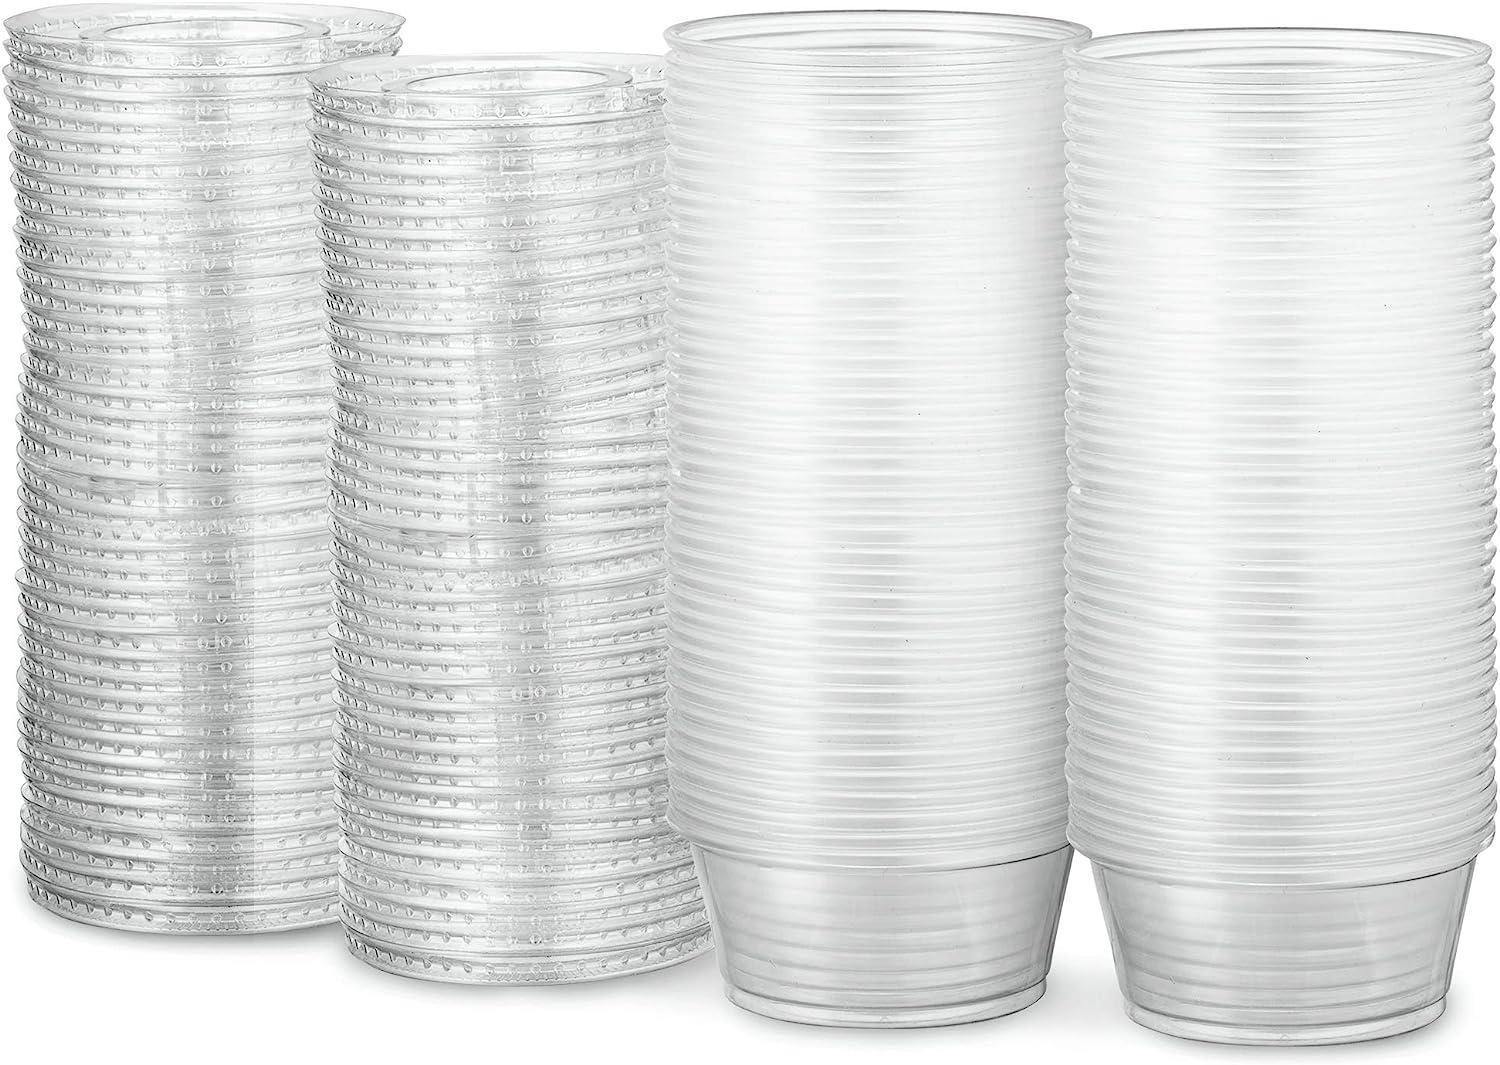 Plastimade Clear Disposable Plastic 1 Oz Portion Cups (100 Sets) -  Condiment, Sauce, Dressing, Jello Shot Cups With Lids